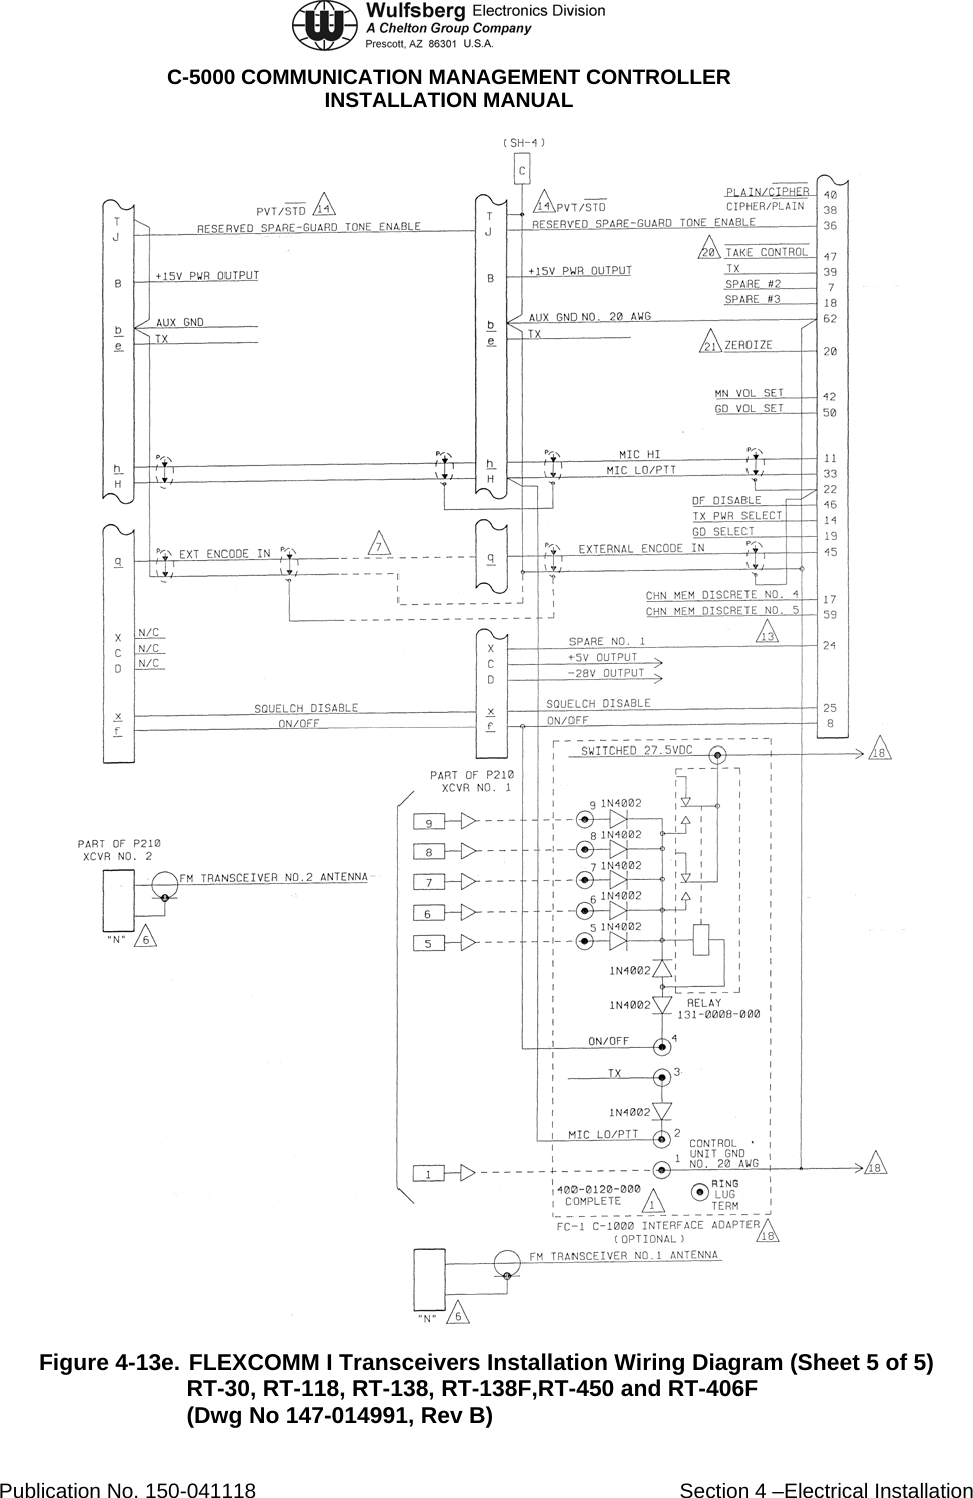  C-5000 COMMUNICATION MANAGEMENT CONTROLLER INSTALLATION MANUAL  Figure 4-13e. FLEXCOMM I Transceivers Installation Wiring Diagram (Sheet 5 of 5) RT-30, RT-118, RT-138, RT-138F,RT-450 and RT-406F (Dwg No 147-014991, Rev B) Publication No. 150-041118  Section 4 –Electrical Installation 